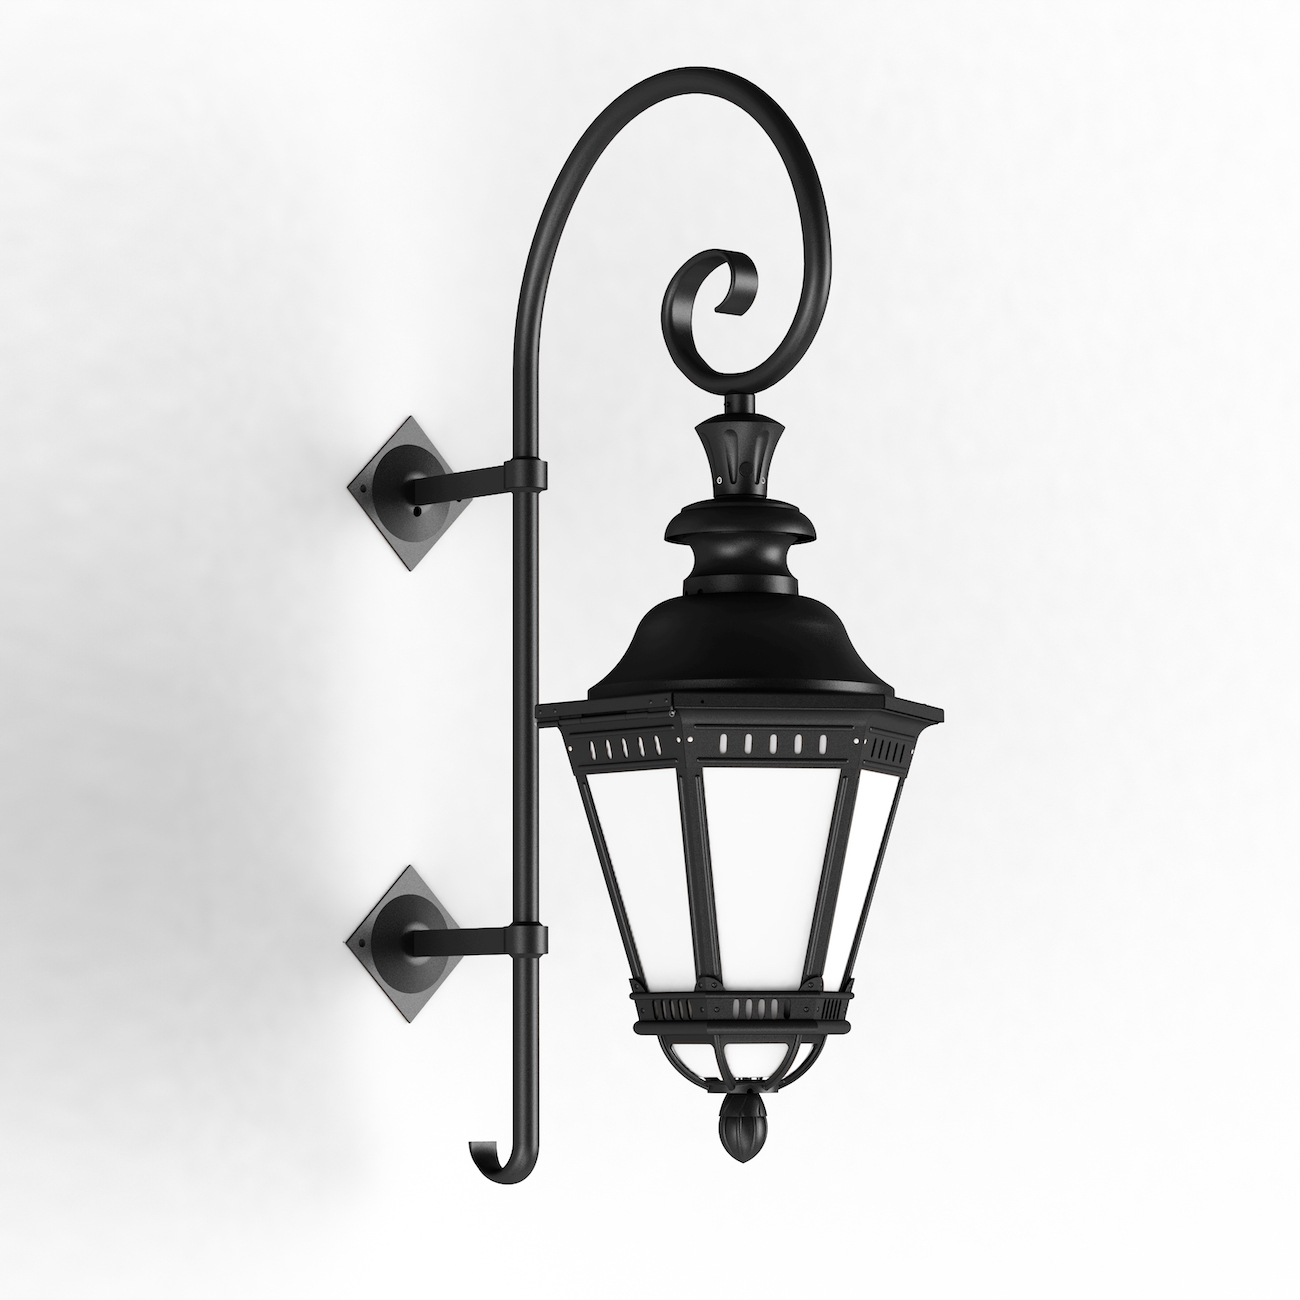 Large Exquisite LED Wall Lantern Citadelle with Crozier